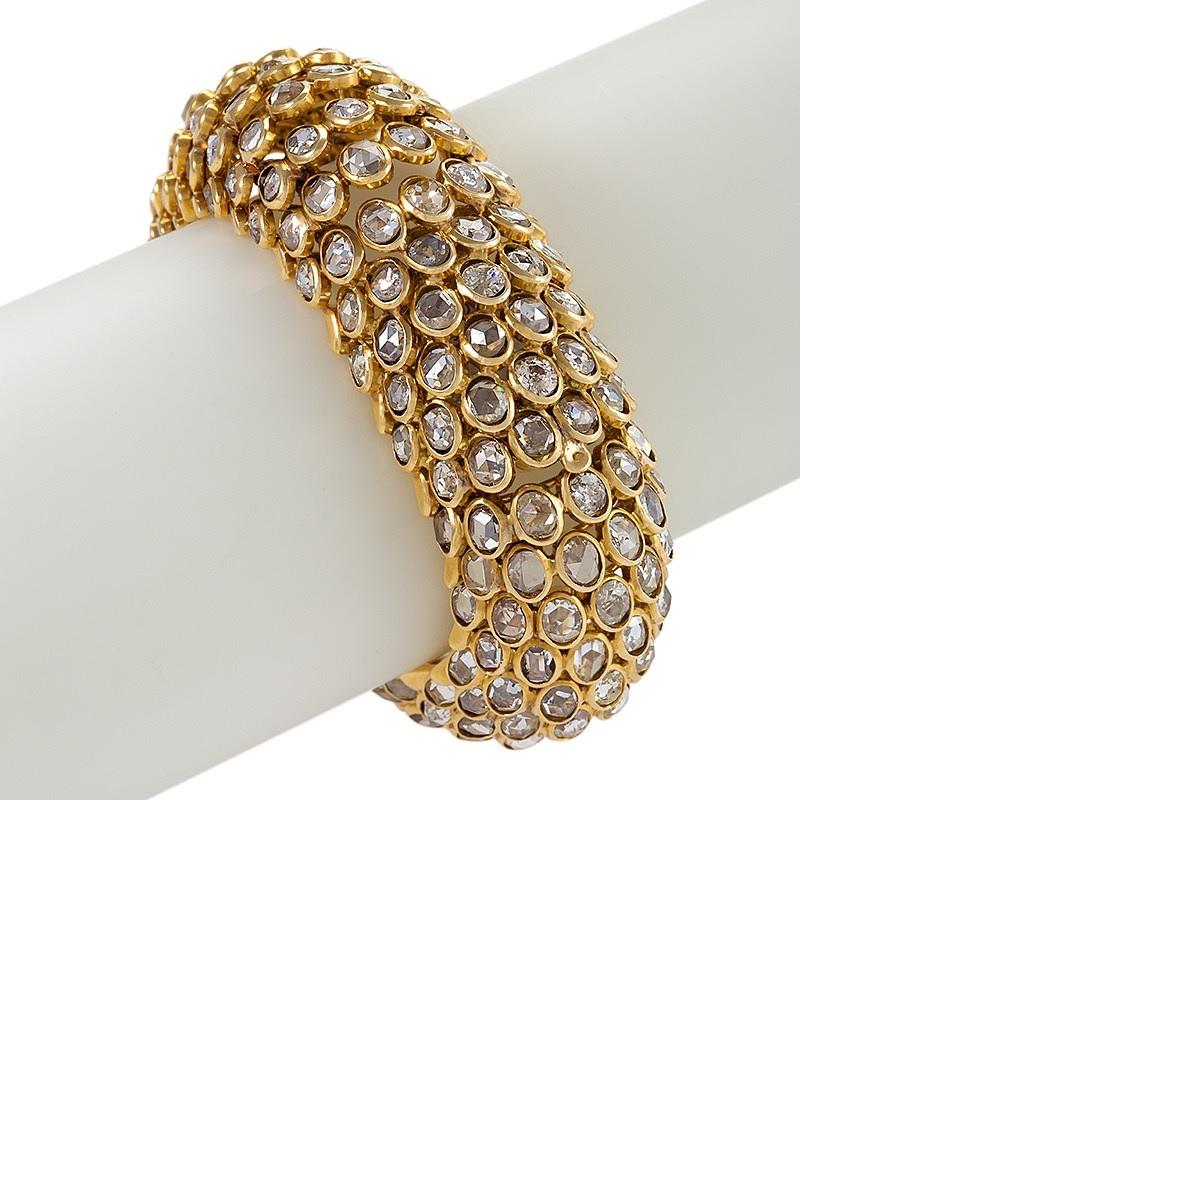 An 18 karat gold bracelet watch by René Boivin. The watch has 252 rose-cut diamonds that have the approximate total weight of  42.25 carats. The bracelet is executed in Boivin's famed fish-scale design, with angled tiers of oval-shaped rose-cut